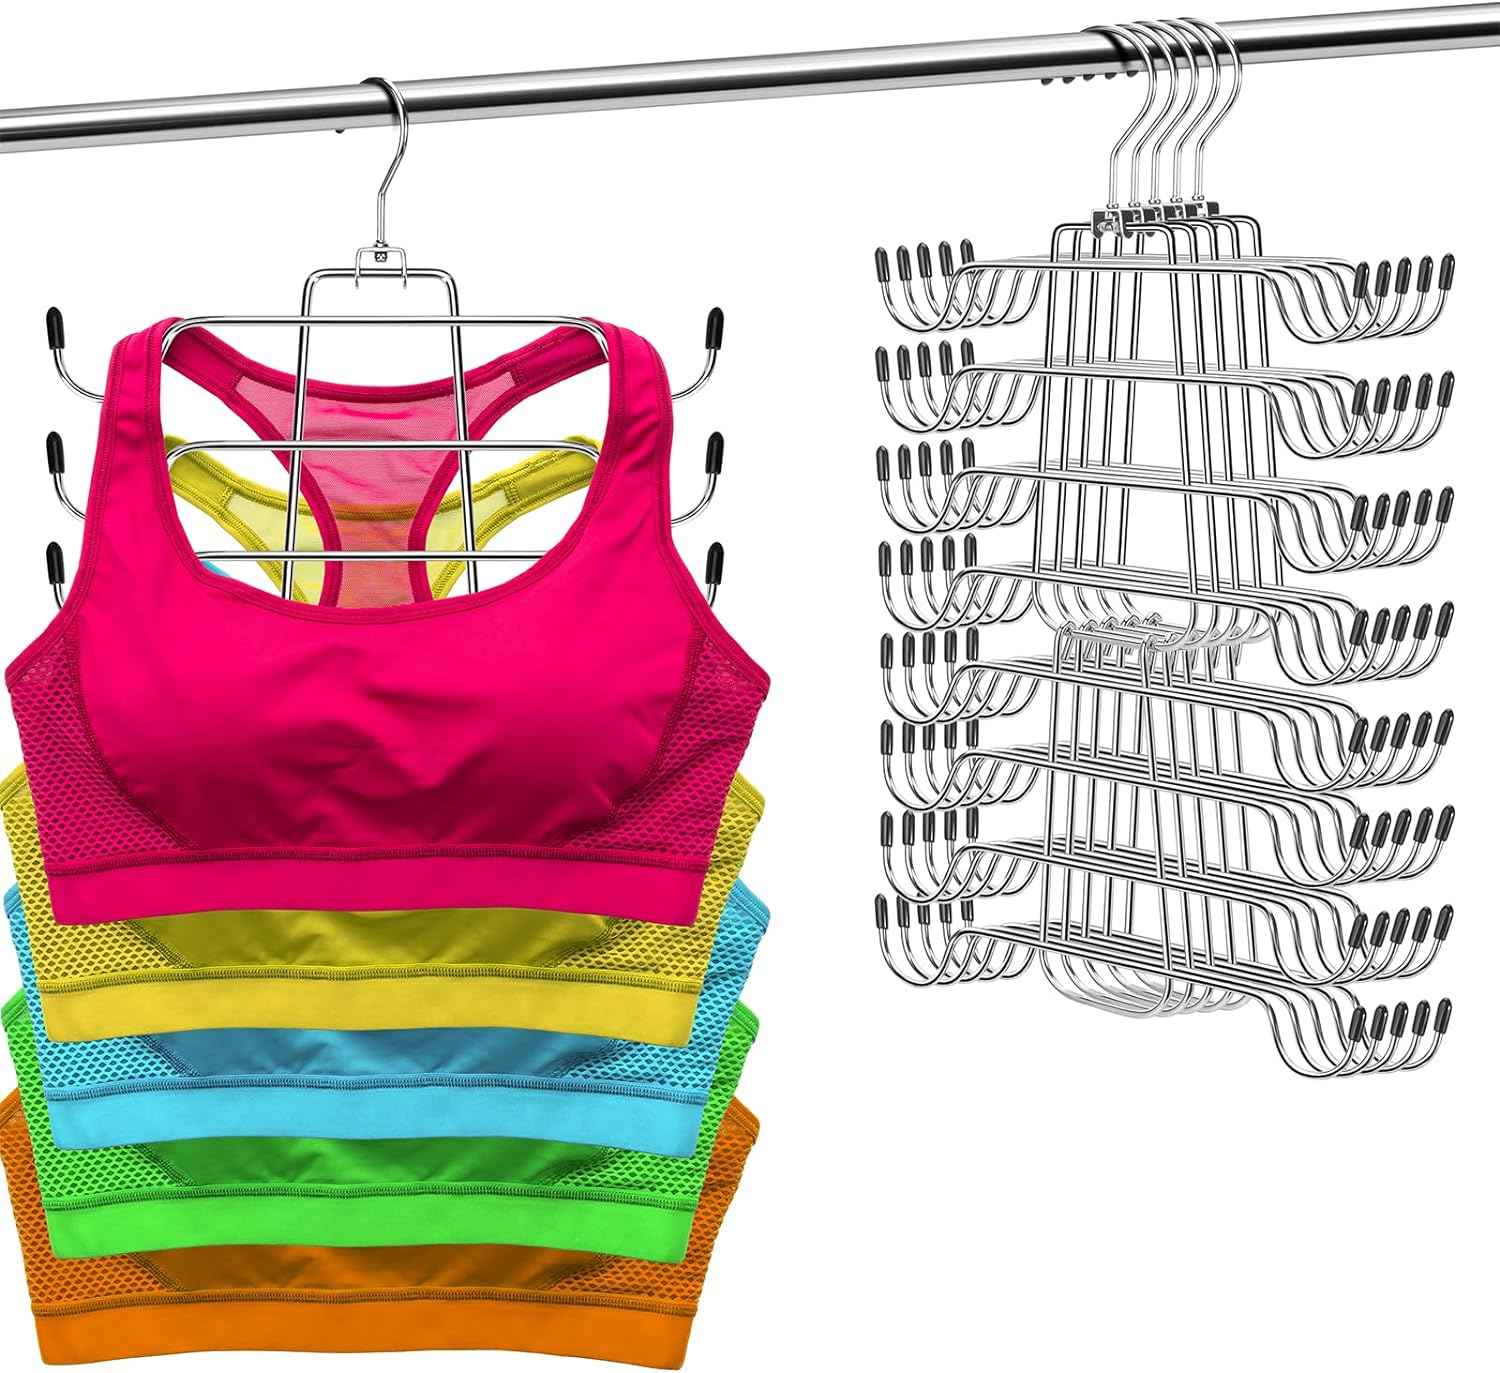 6 Pack Tank Top Hangers Space Saving, ZOUTOG 8 Tier Bra Hanger Closet Organizers and Storage, Dorm Room Essentials for College Girls, Closet Organizer for Camis, Tank Tops, Bras, Swimsuits & More